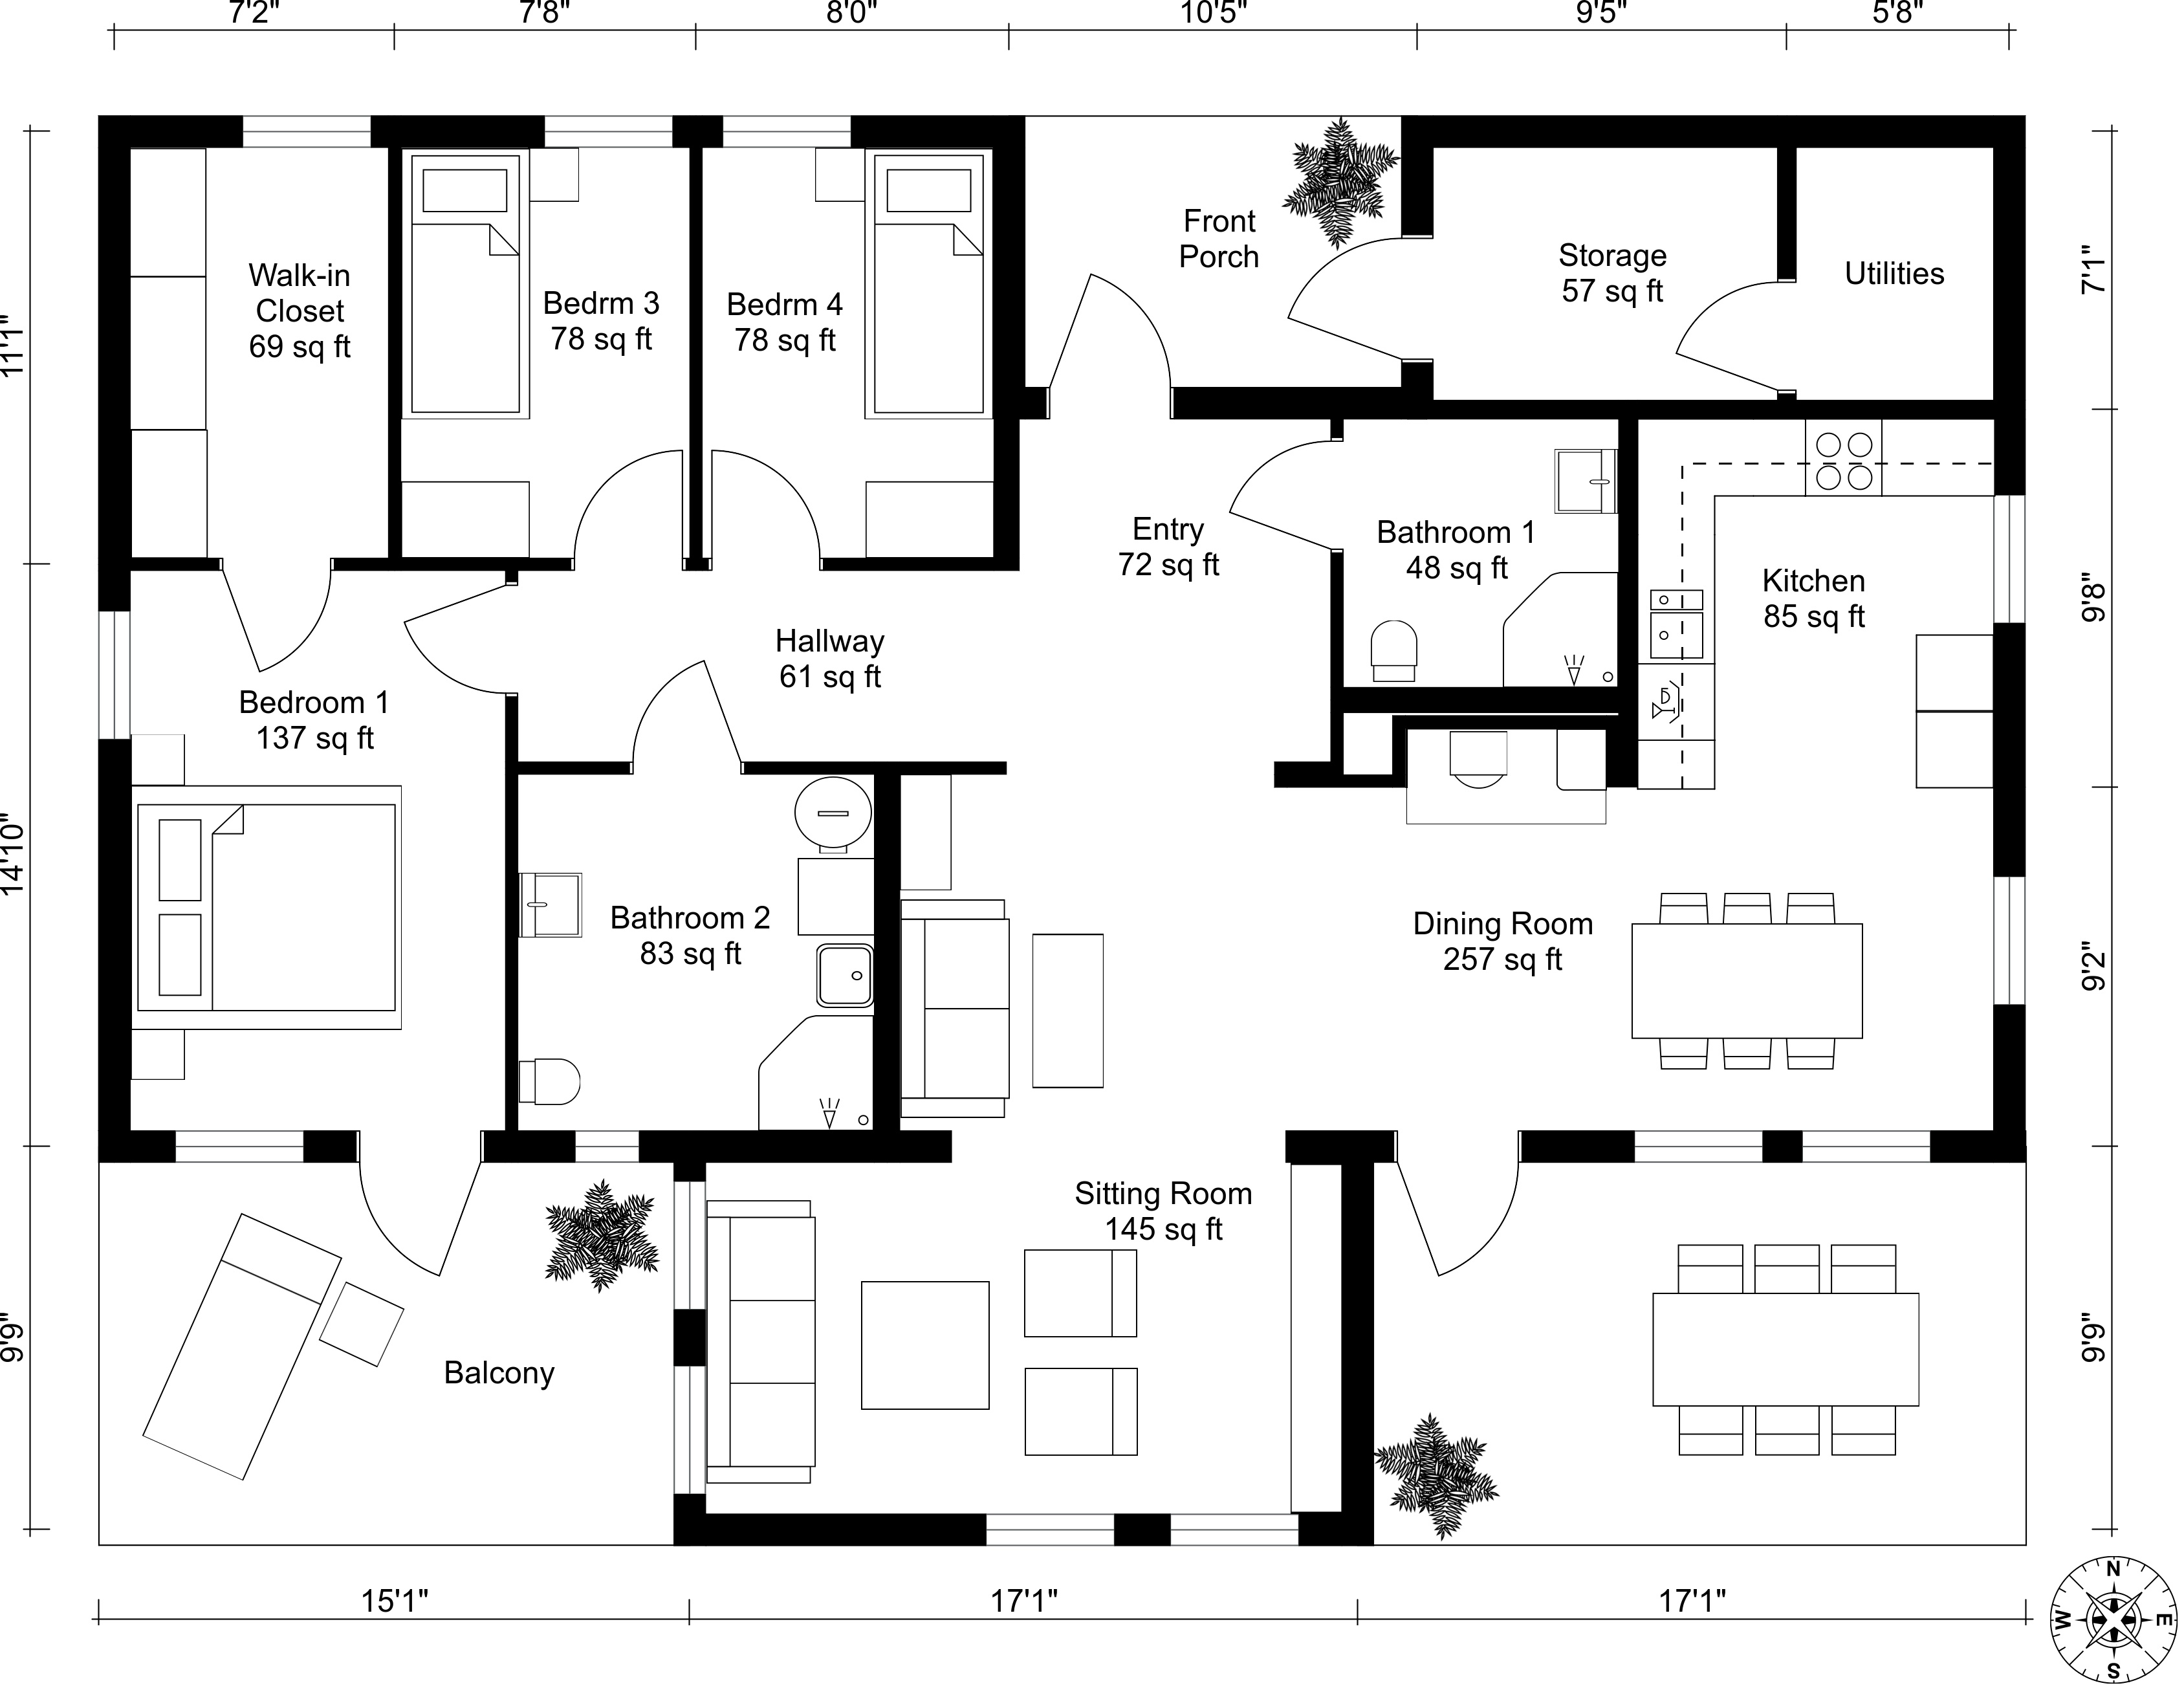 Black and White 2D Floor Plan from RoomSketcher